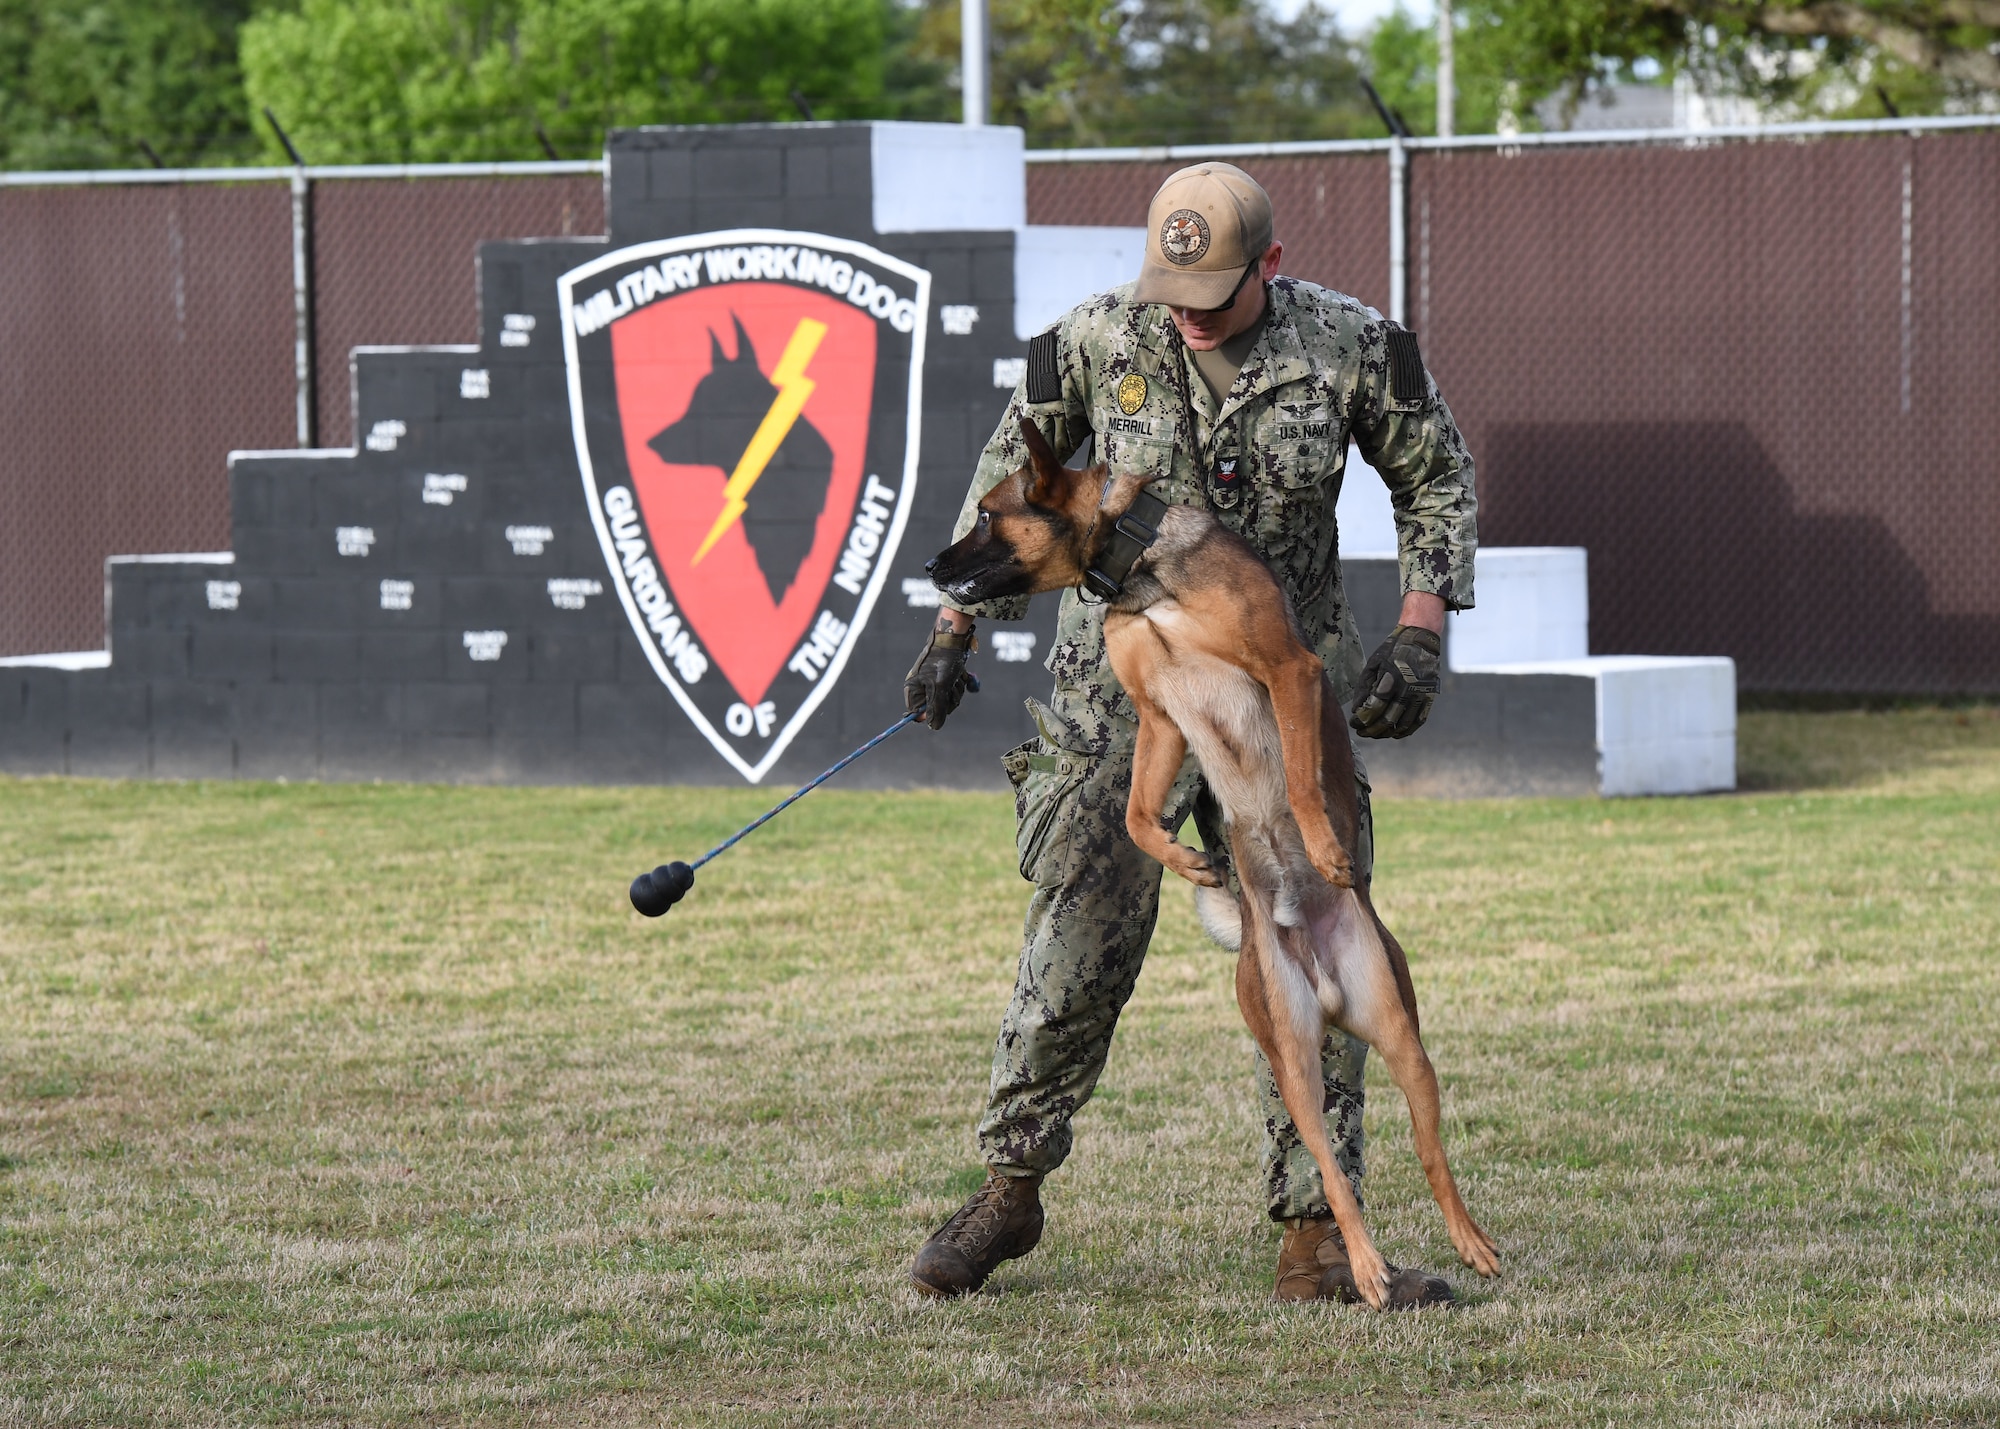 U.S. Navy Master at Arms 2nd Class Justin Merrill, Naval Construction Battalion Center Gulfport kennel trainer, and Jjester, NCBC Gulfport military working dog, participate in an obedience demonstration during the K-9 Veteran's Day Ruck & Demonstration at Keesler Air Force Base, Mississippi, March 13, 2023.